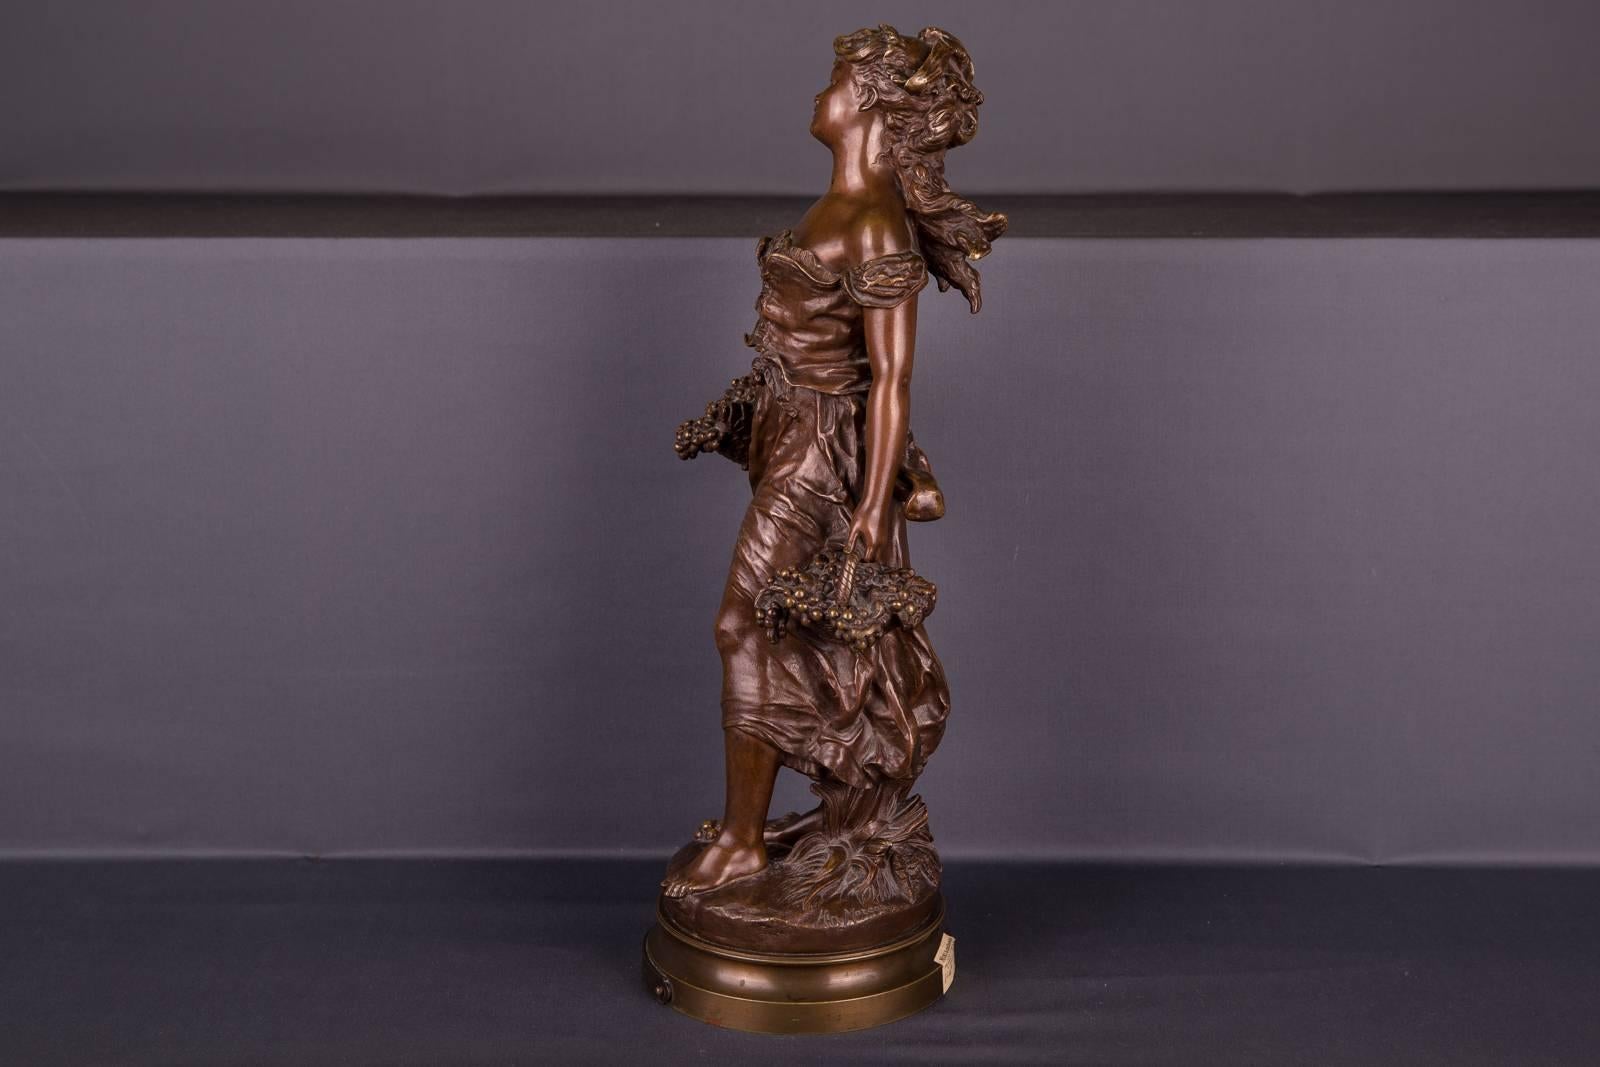 Great bronze sculpture from the artist Moreau depicting a young lady in summer dress. Free-hailed lady with open hair and slightly smiling facial expression looking into the distance. On each hand holding a basket with full vine leaves, which